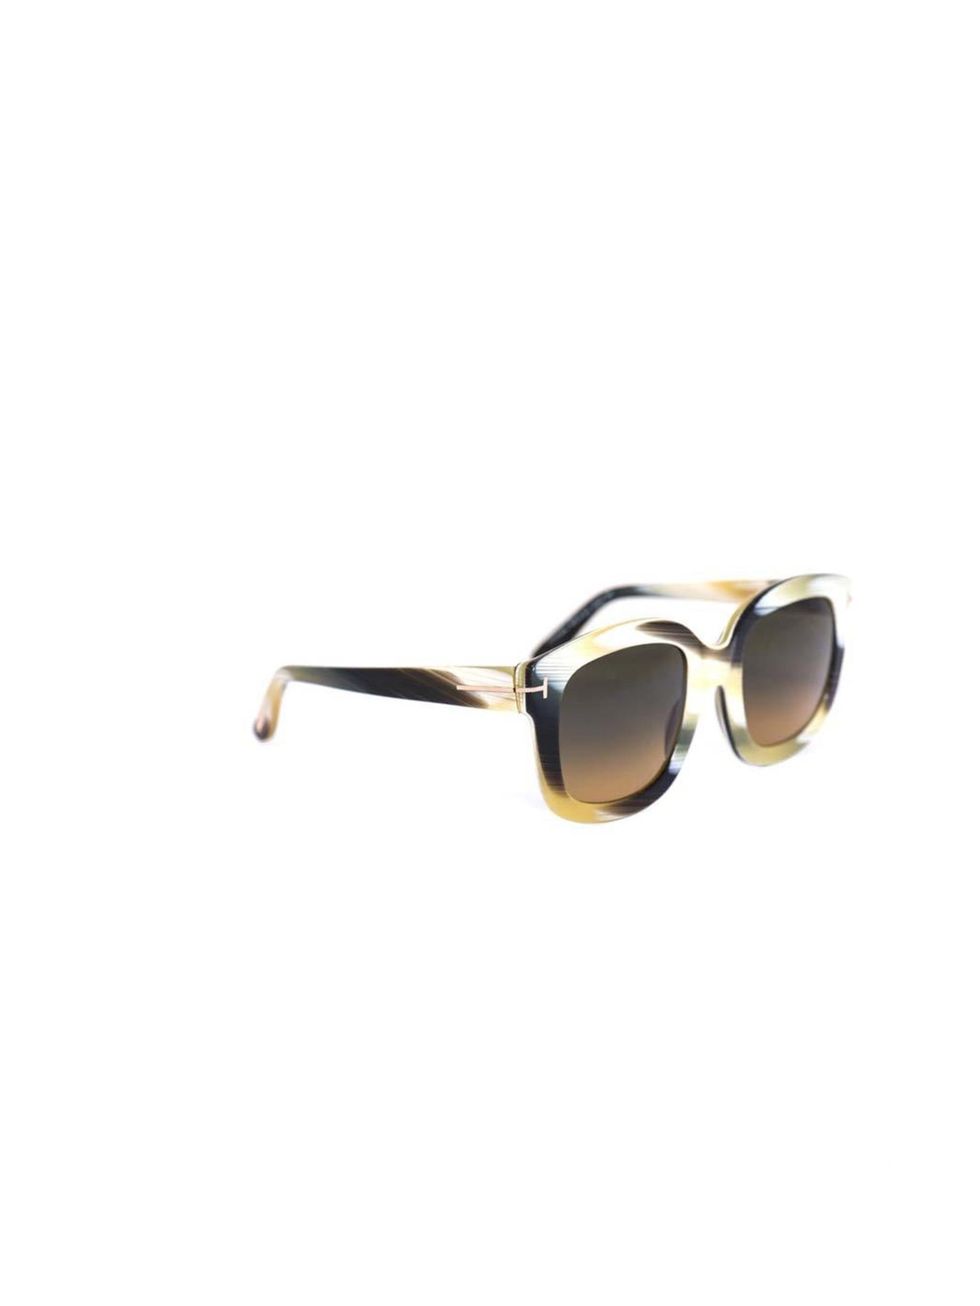 <p>Tom Ford sunnies are a favourite among Fashion Editors - these oversized frames are bold but still sophisticated, and super-flattering to wear.</p><p>Tom Ford sunglasses, £227 at <a href="http://www.matchesfashion.com/product/180874">MatchesFashion.com